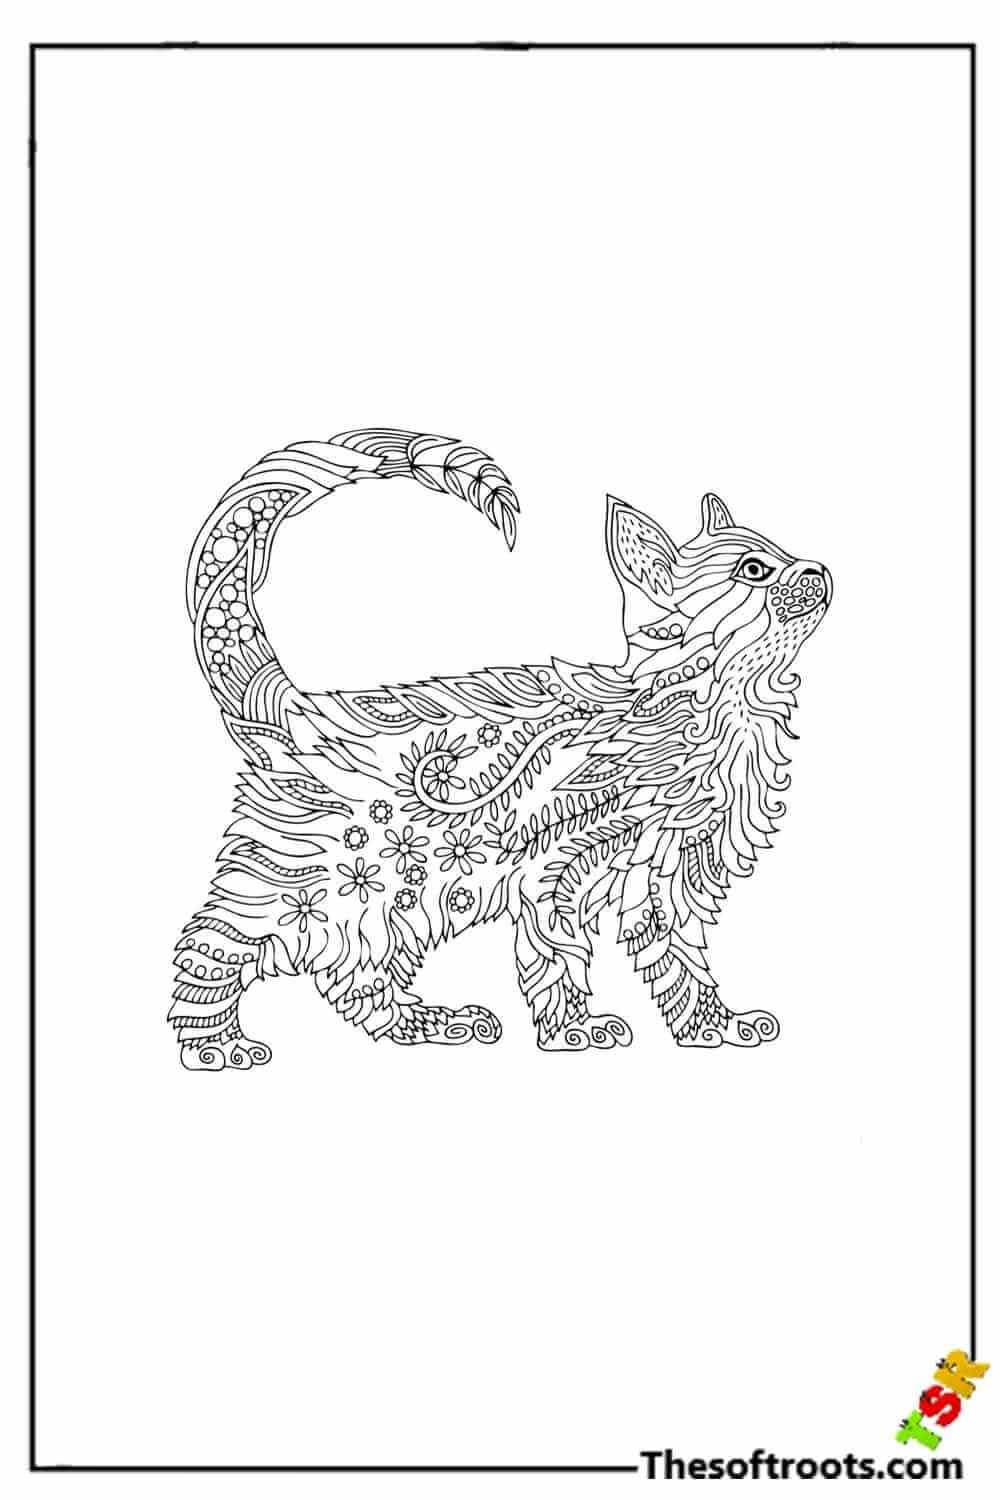 Adult Cat coloring pages